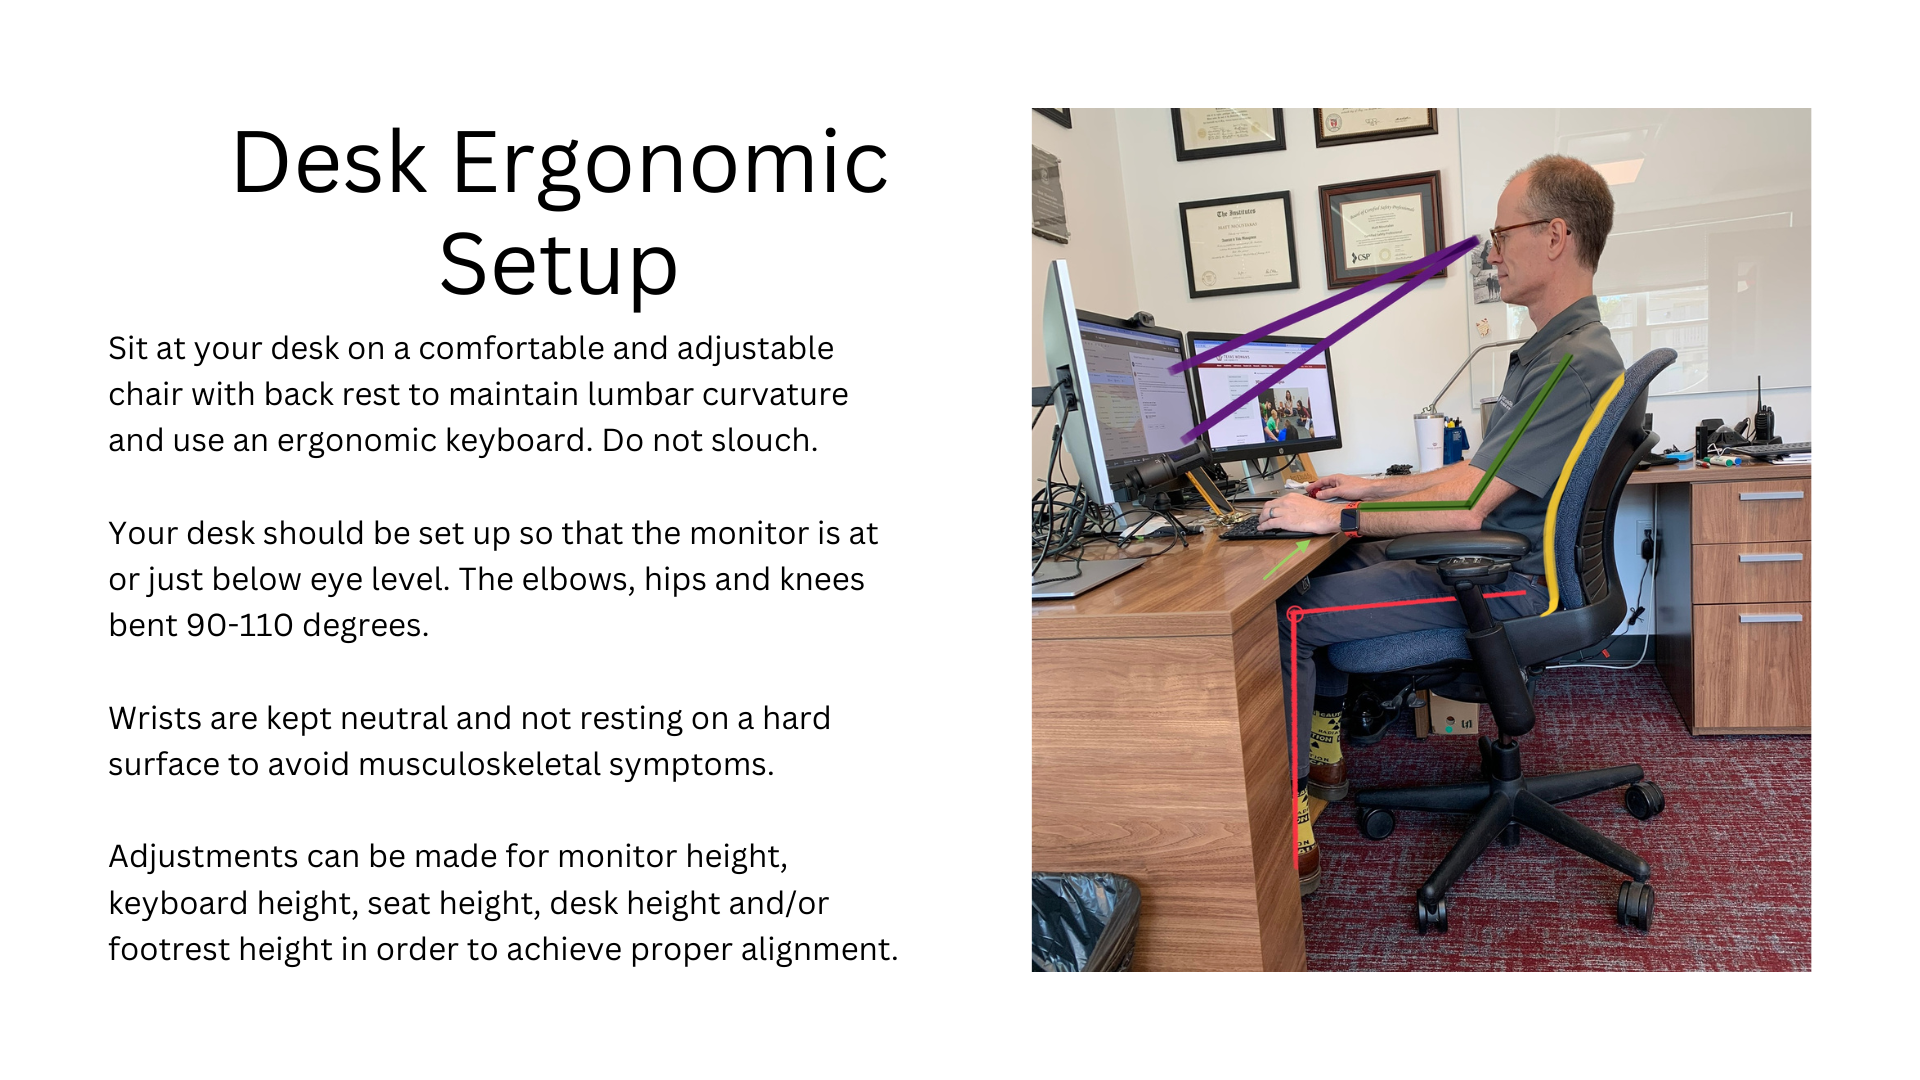 Infographic describing how to properly set up a desk for optimal ergonomics. The text is accompanied by a picture of a man sitting at a desk in an office chair with different colored lines highlighting the ideal body angles.